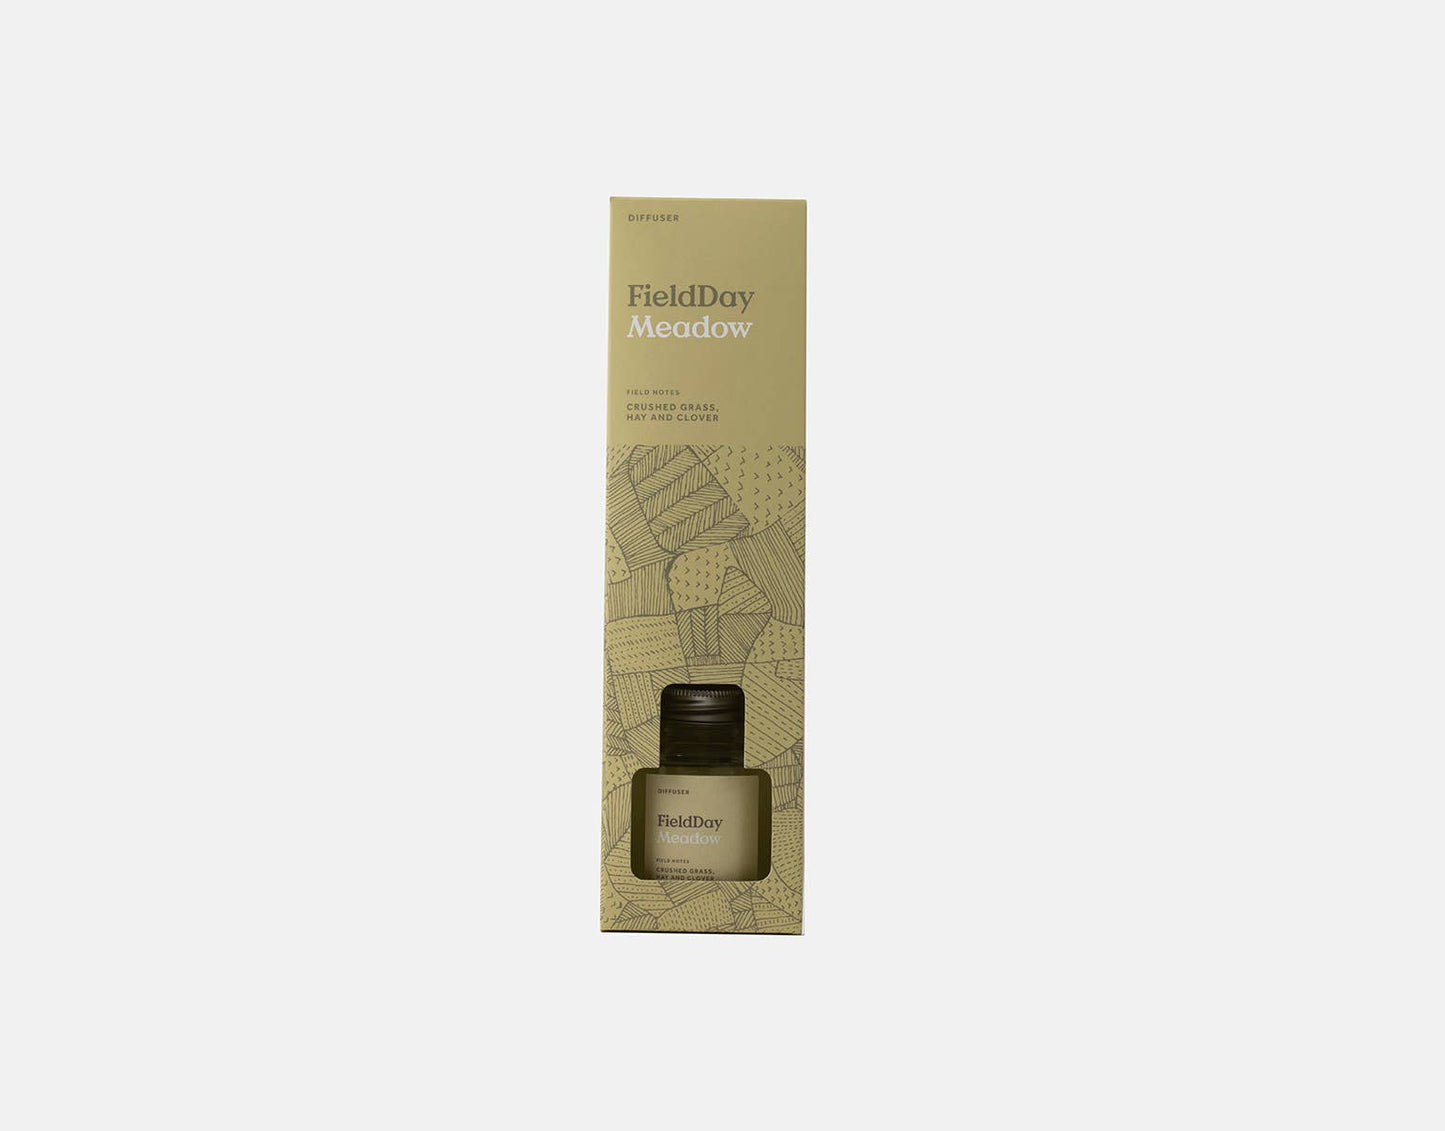 Field day Meadow Room Diffuser